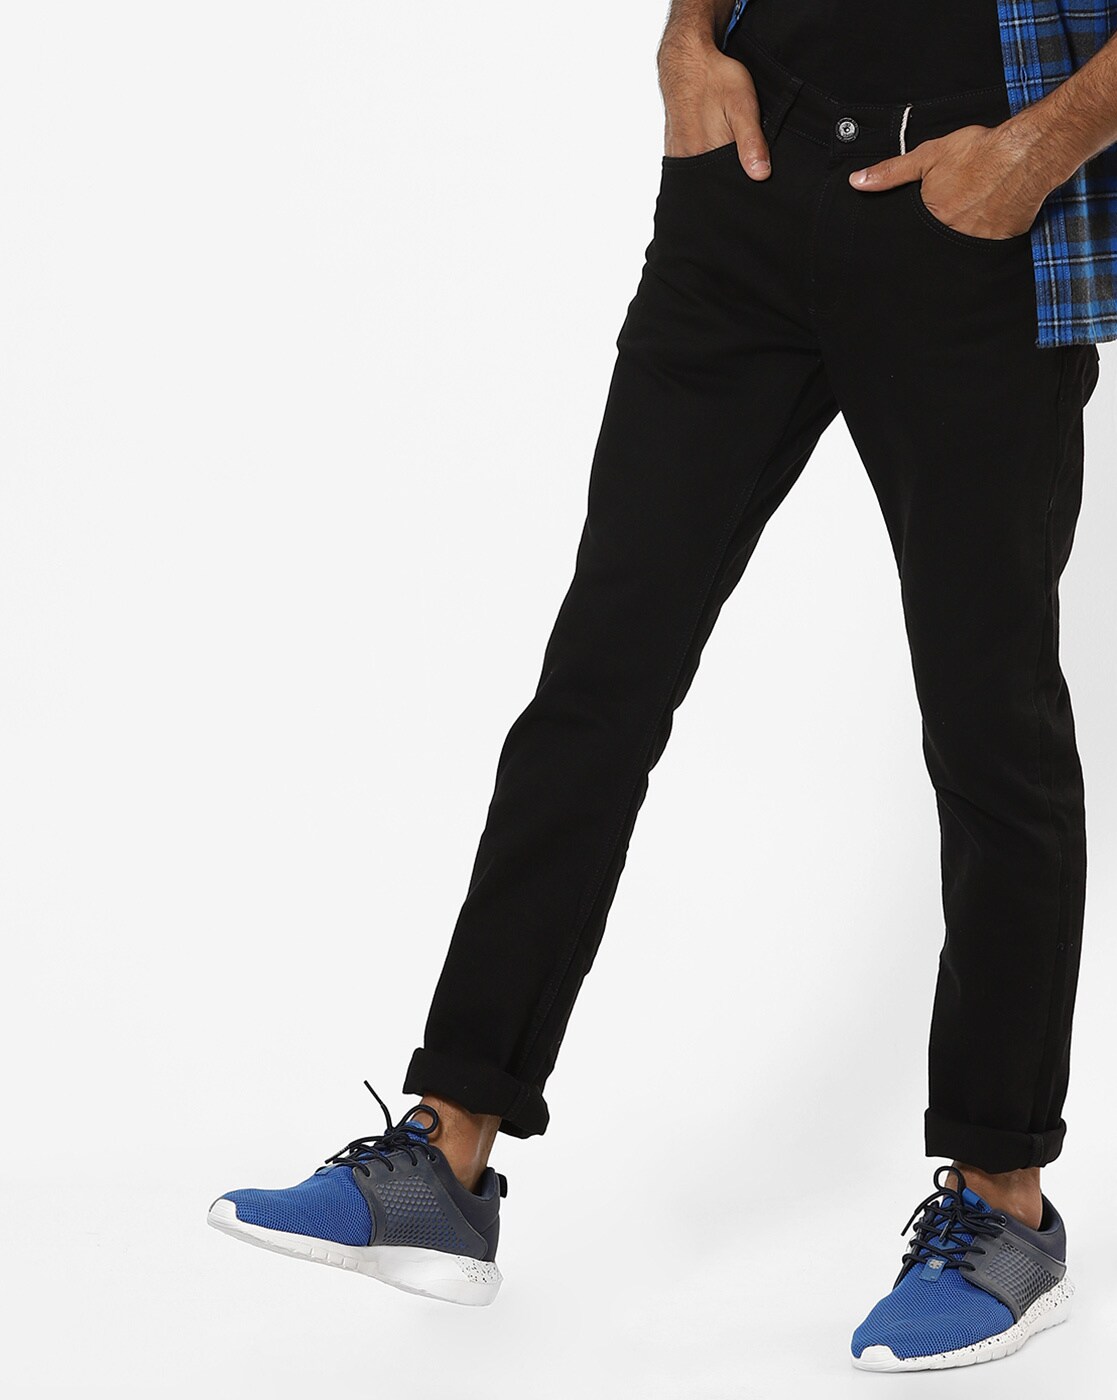 tapered fit black jeans